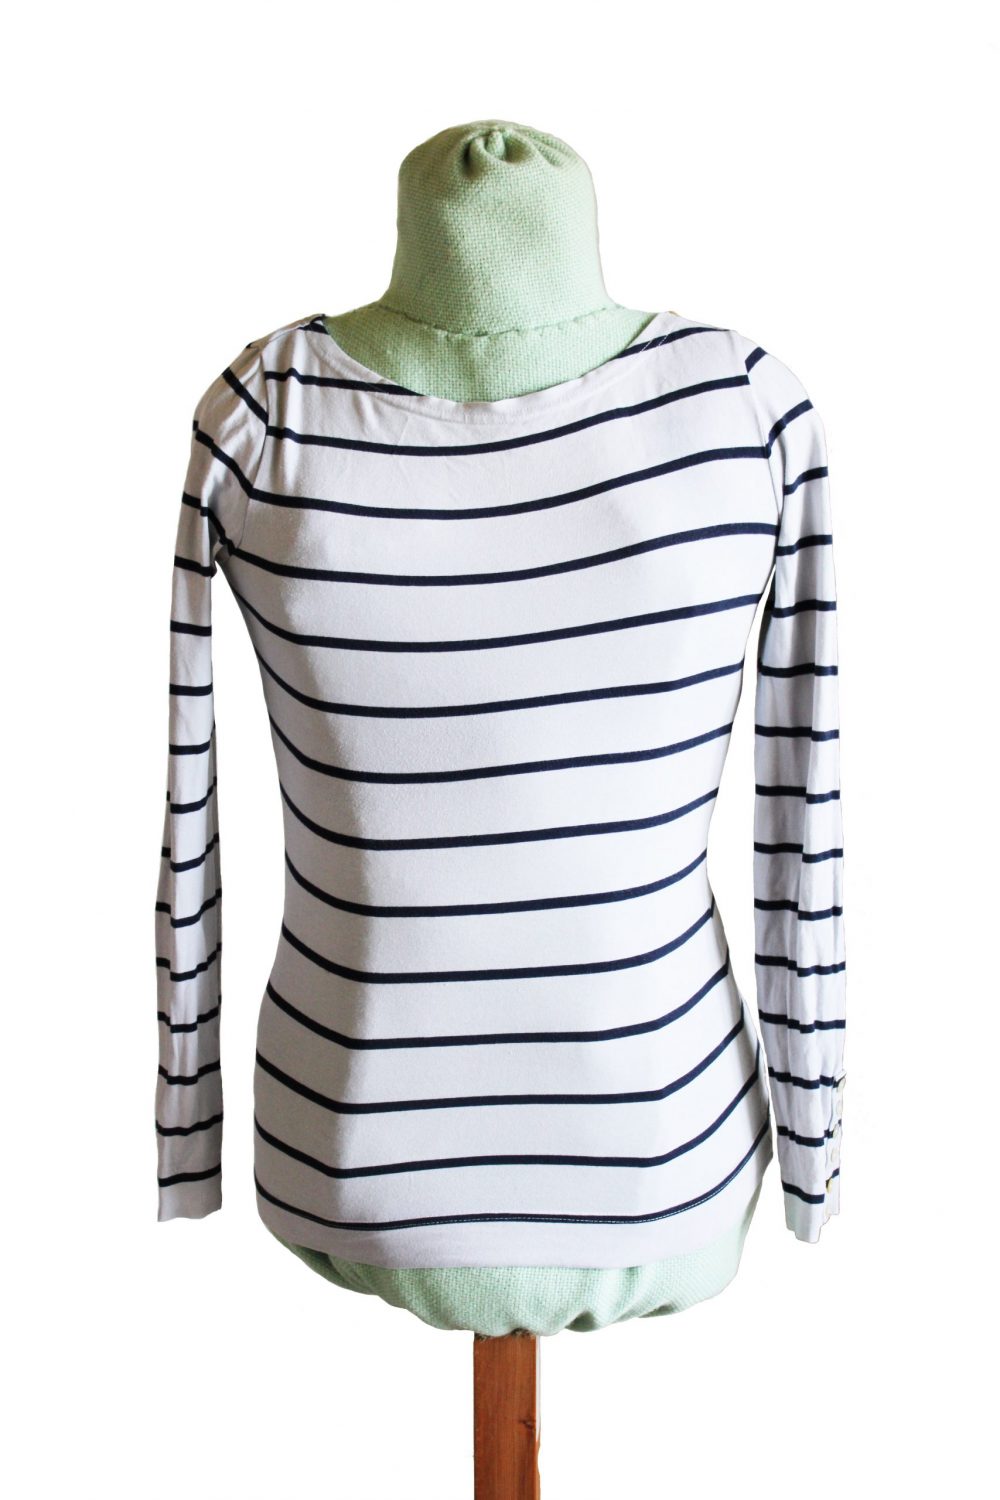 White long sleeved top with dark blue horizontal stripes